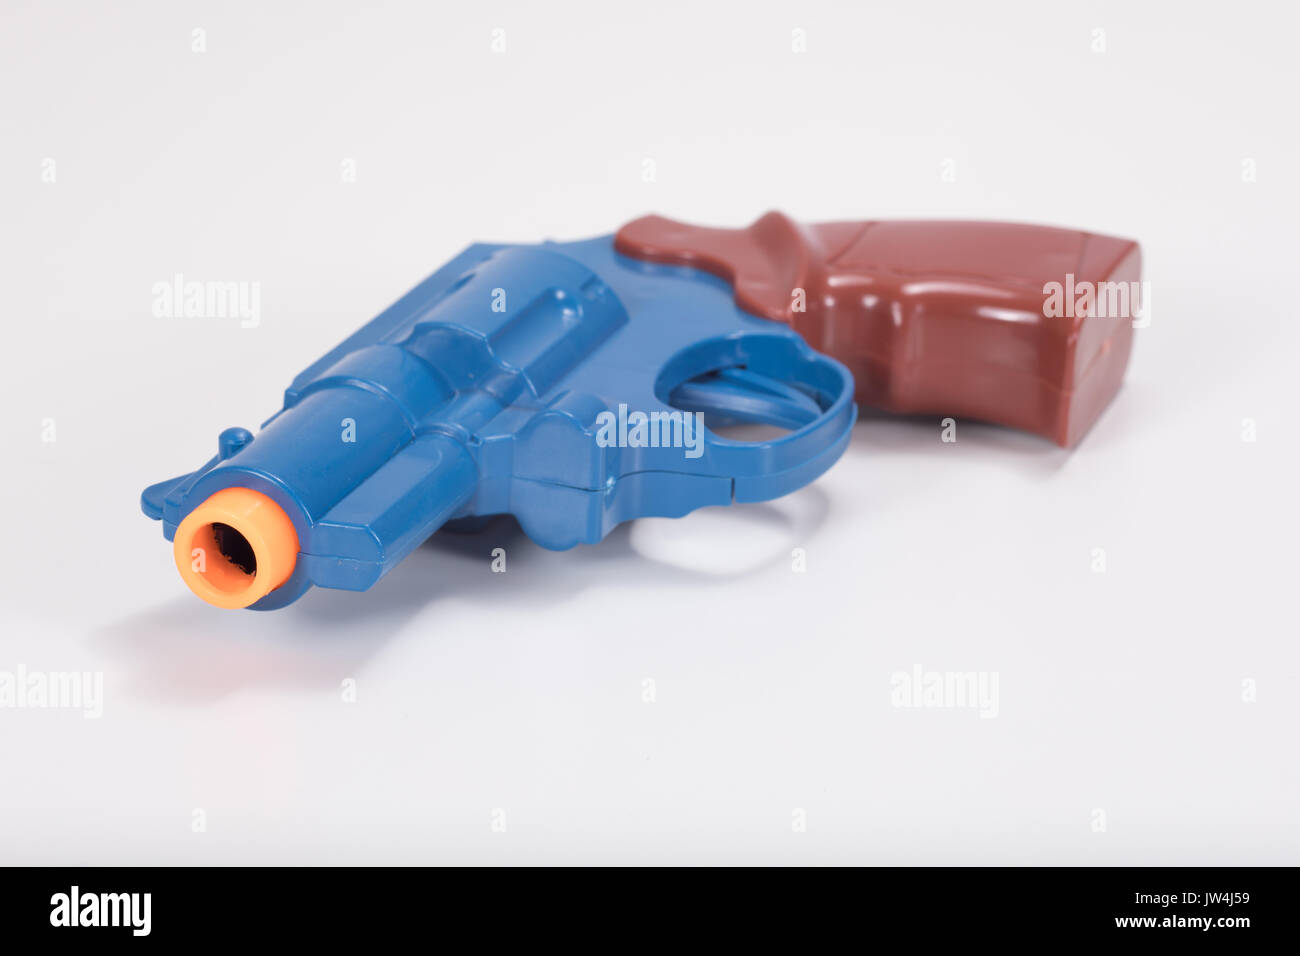 Close up of toy plastic gun barrel and white background with copy space. Stock Photo